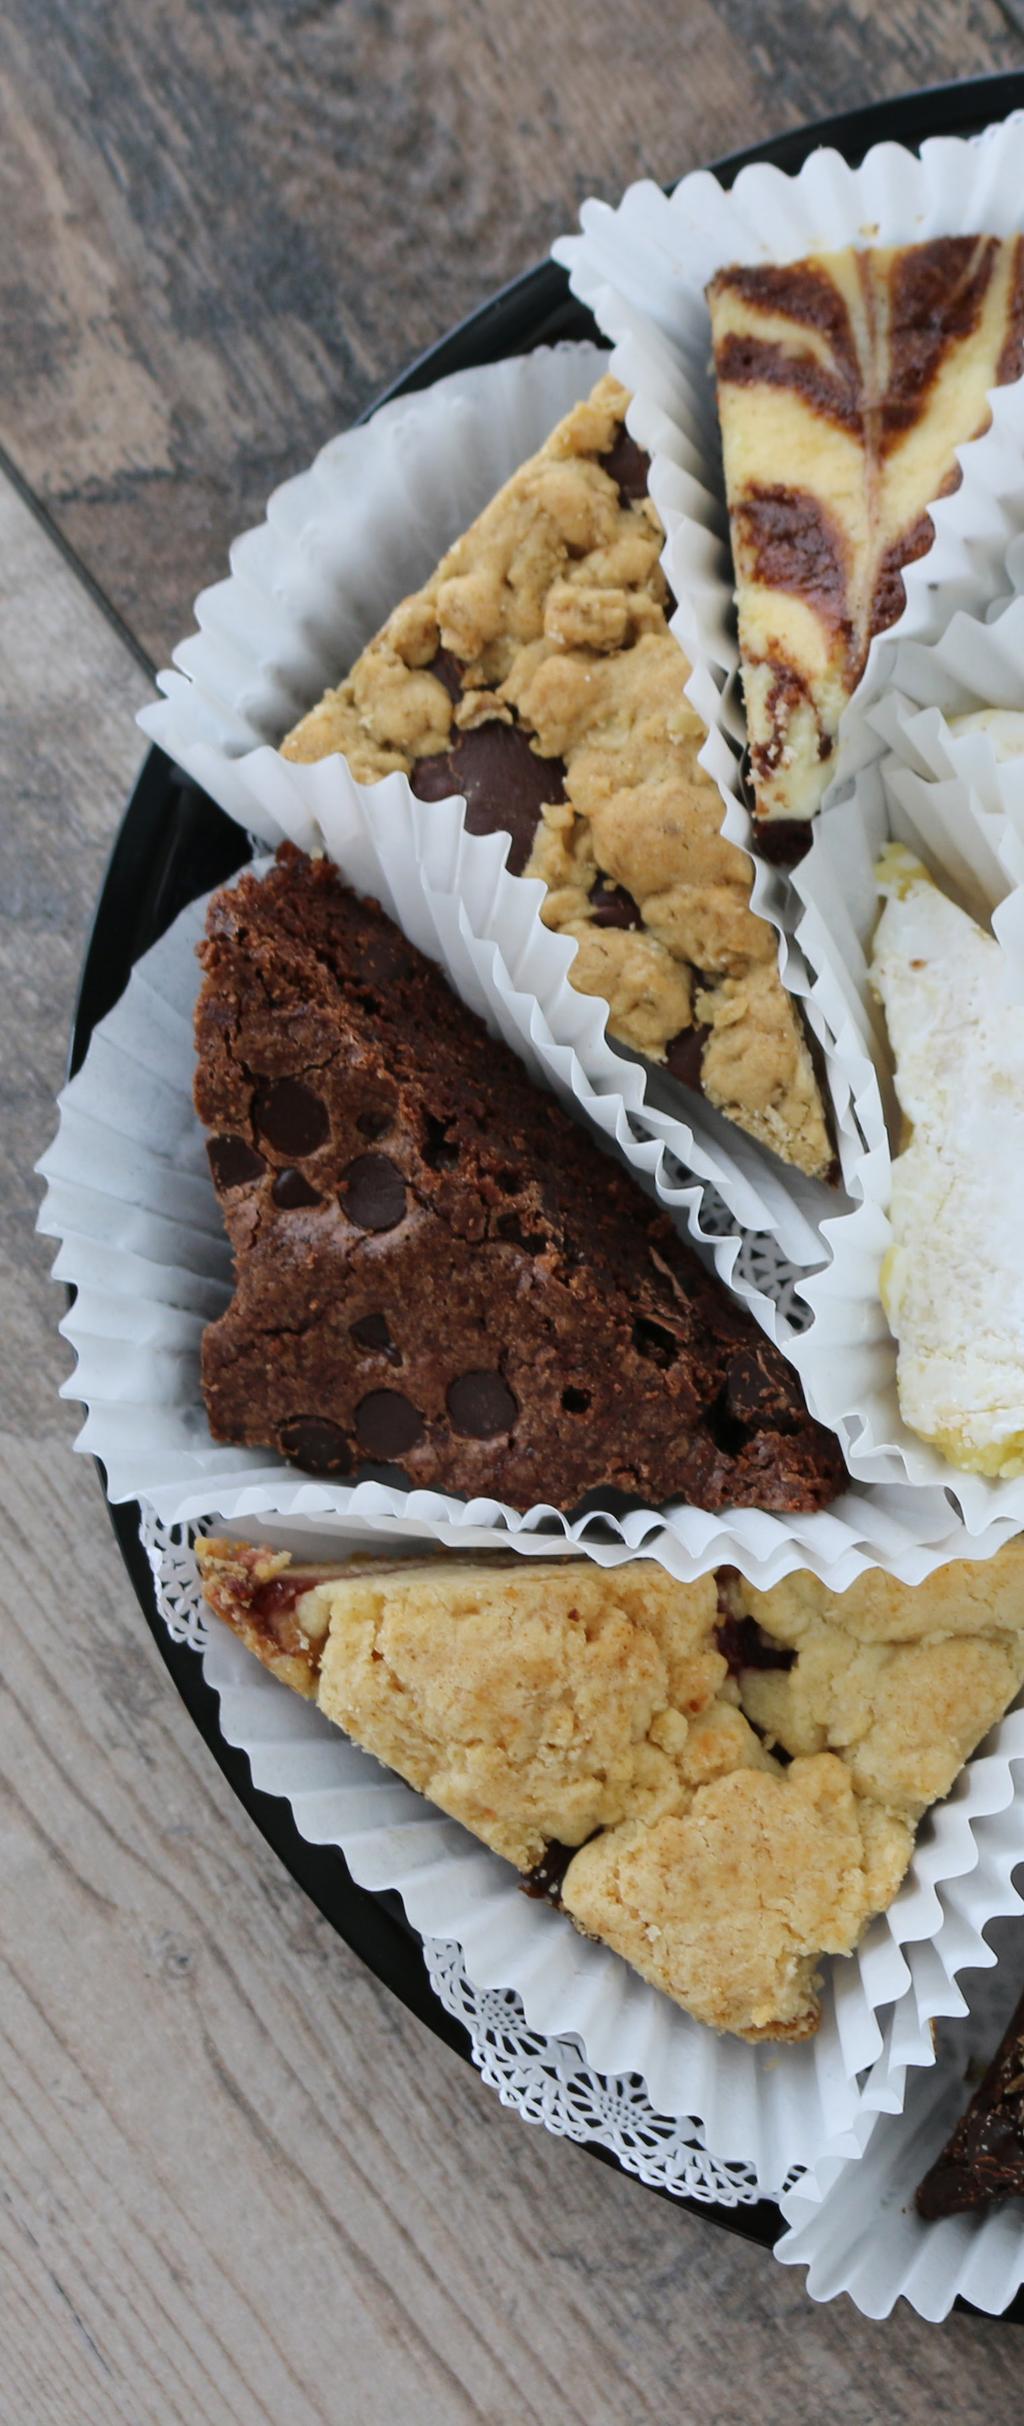 BAKERY TRAYS Choose from a delicious assortment of fresh baked goods made in our bakery!